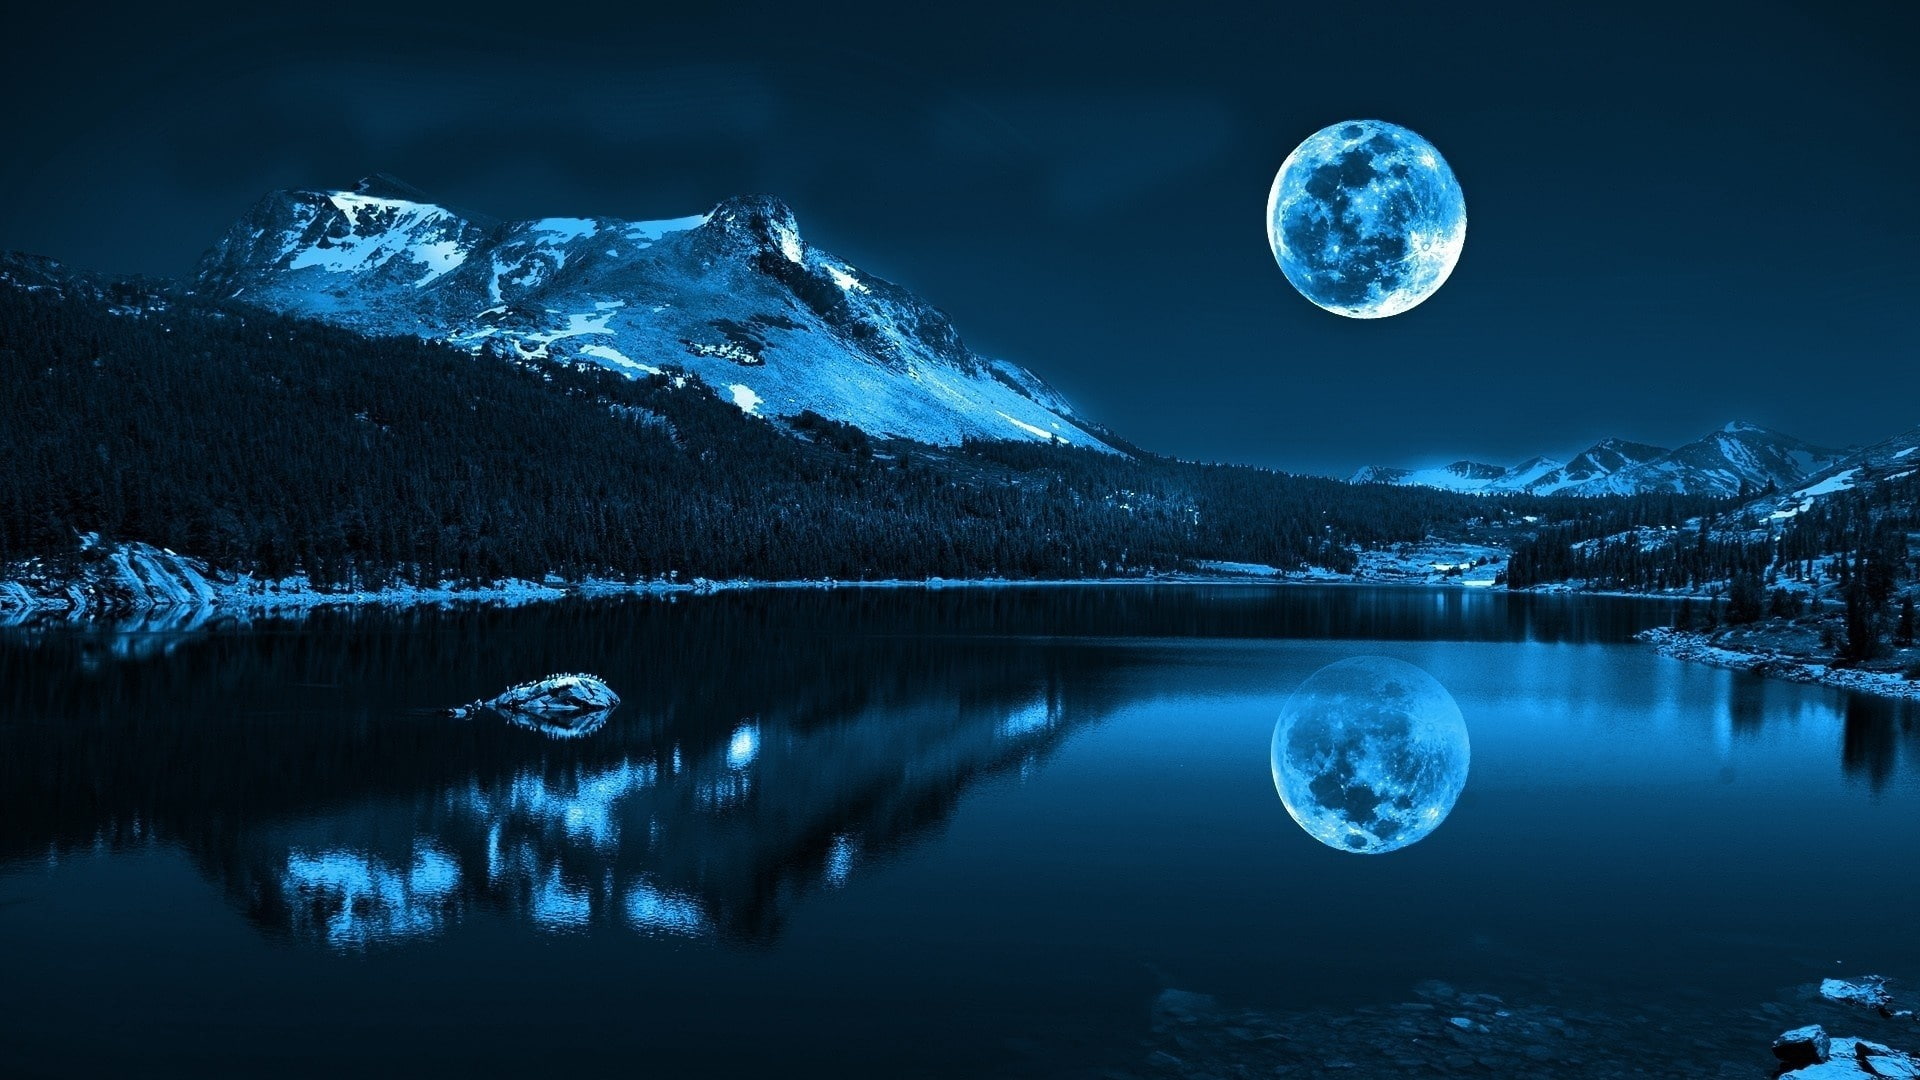 Moon, lake, mountains, cold night, nature scenery